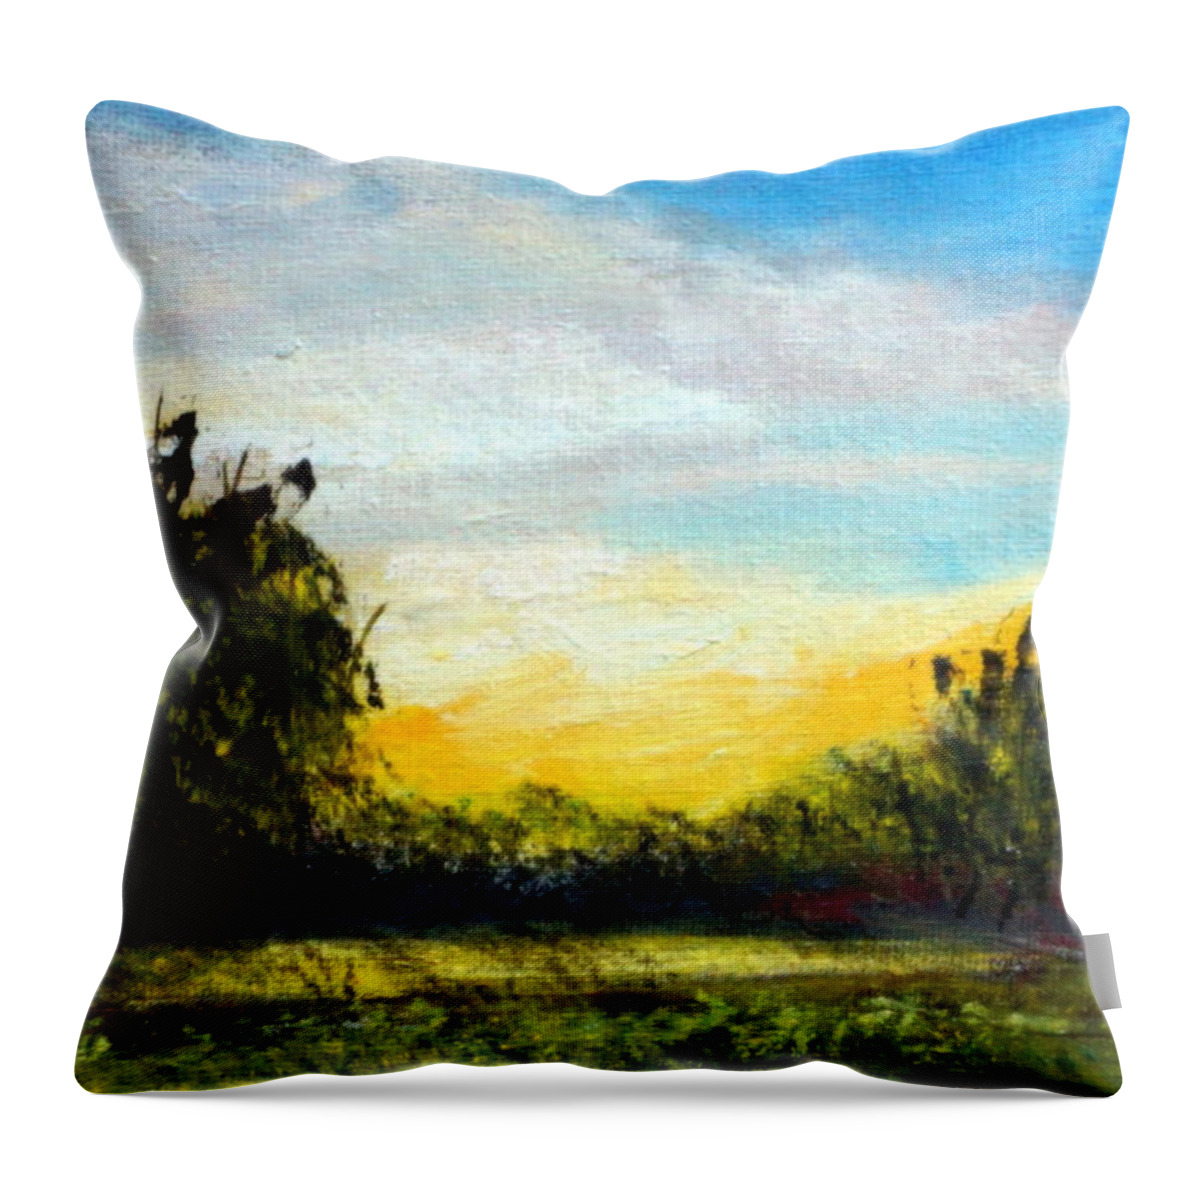 Virginia Throw Pillow featuring the painting Morning Light Virginia by Katy Hawk